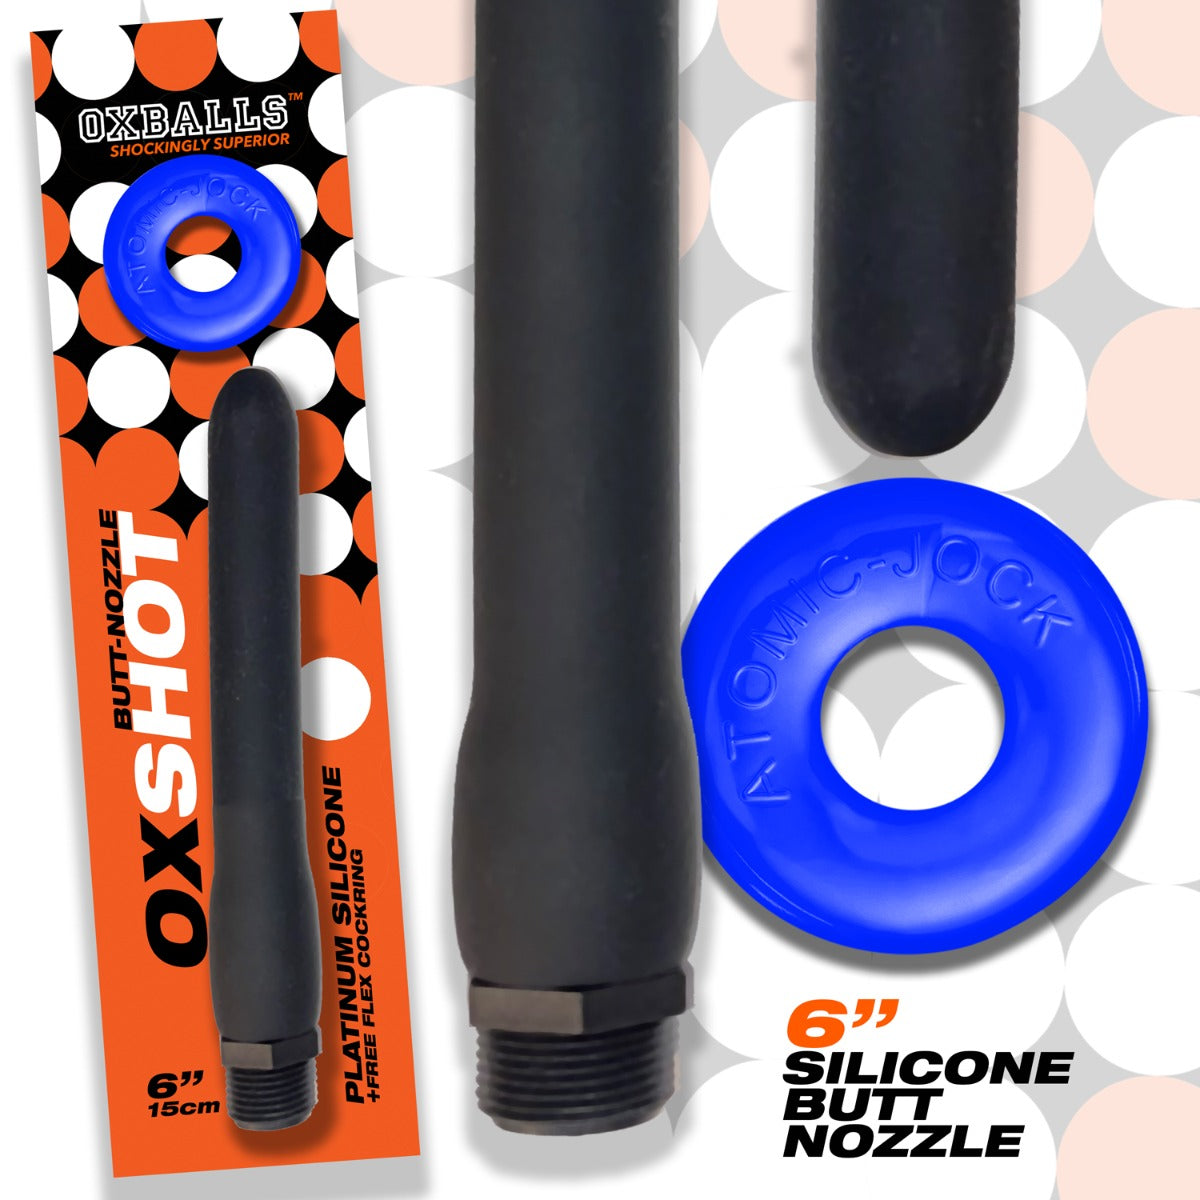 Cock Rings Oxballs Oxshot Butt-Nozzle Shower Hose 6 Inch and Blue Atomic Jock Cockring   